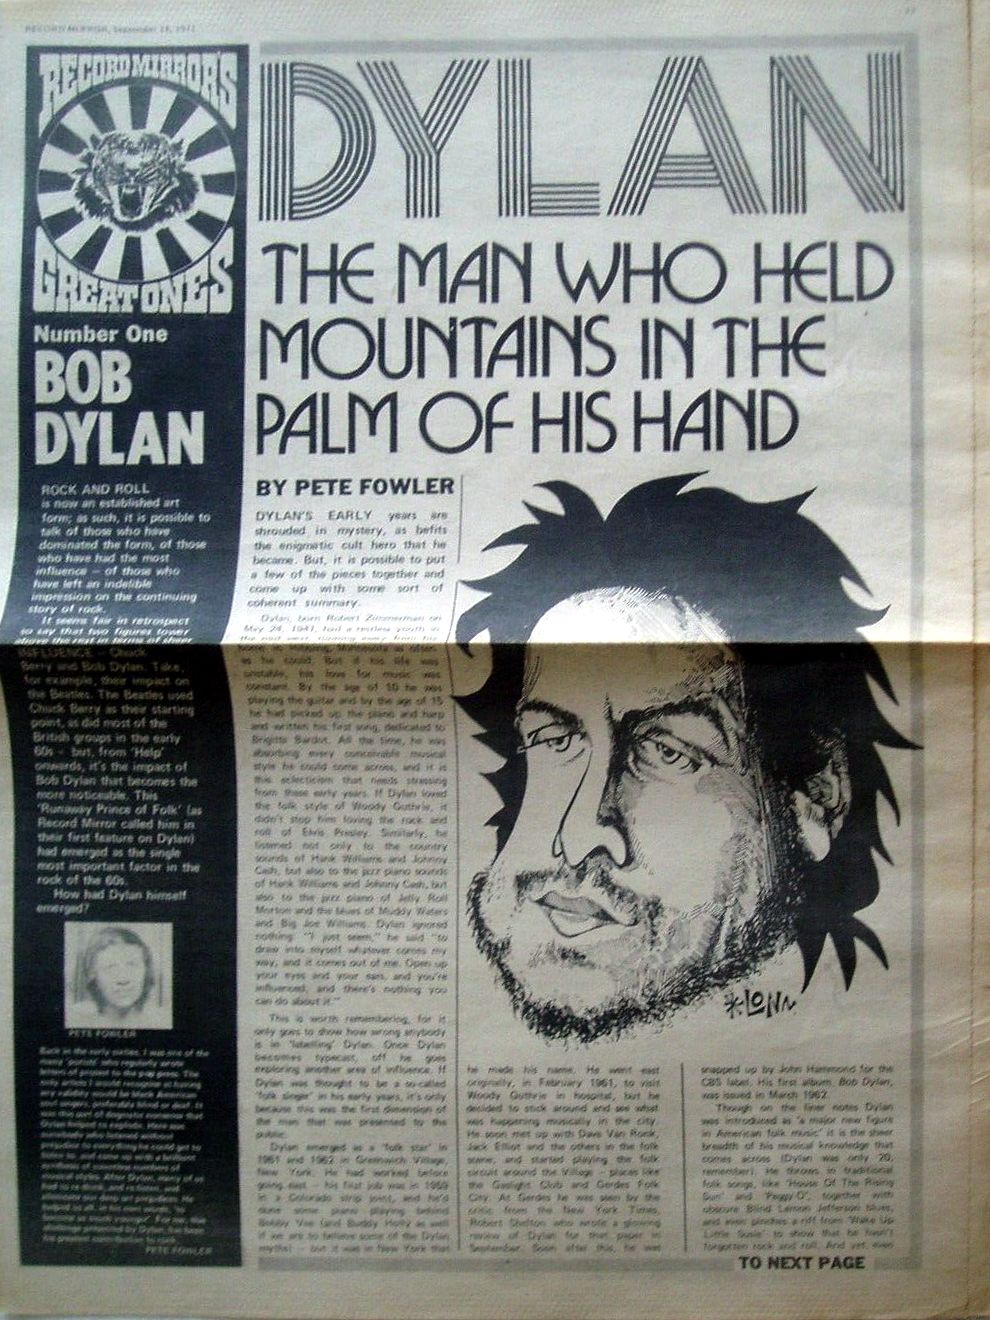 record mirror magazine 18 September 1971 Bob Dylan front cover